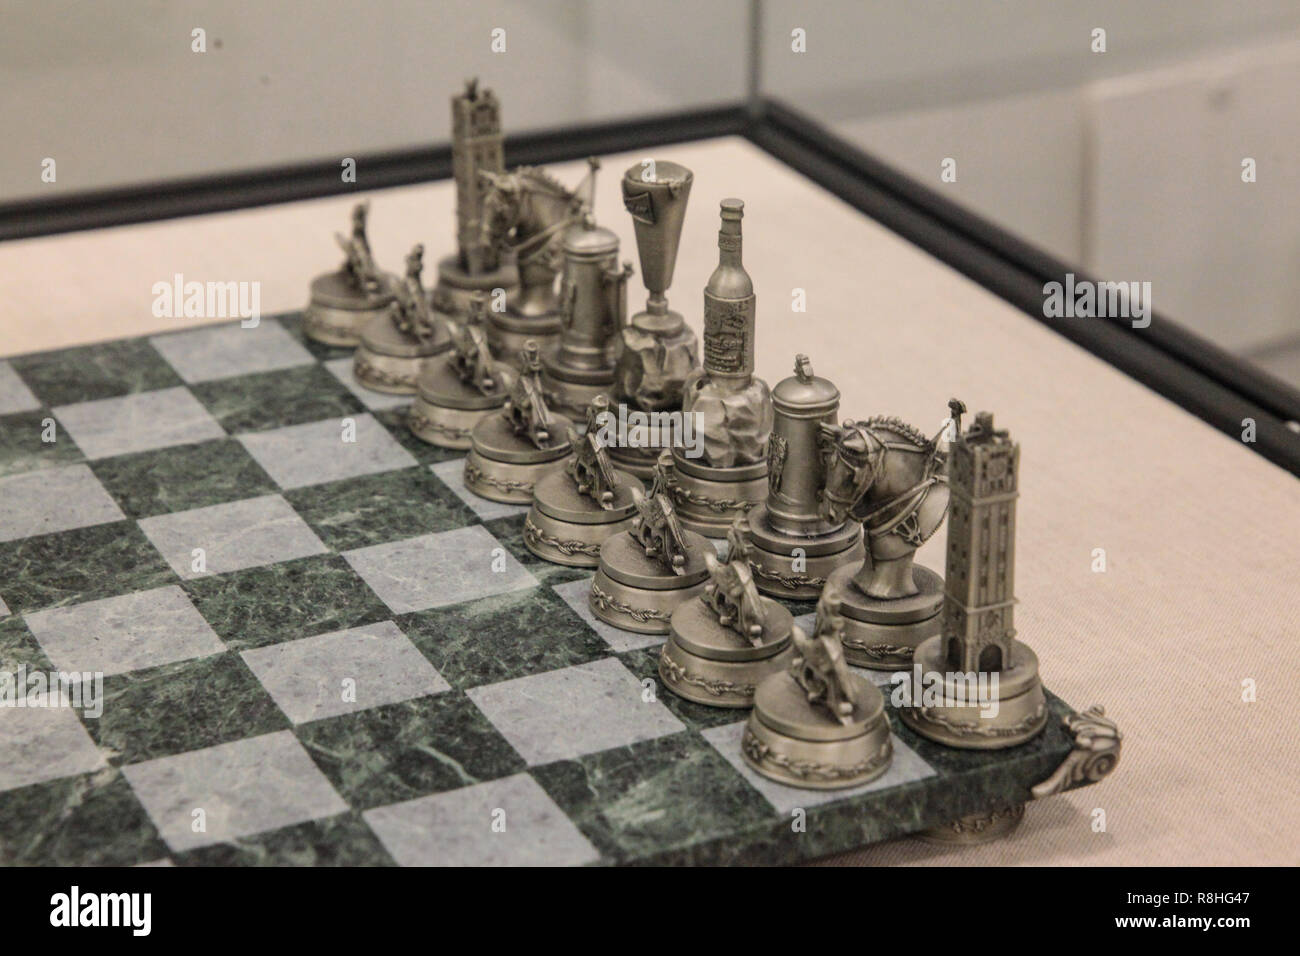 London, UK. 15th December 2018. Anheuseer -Busch Collectors Chess